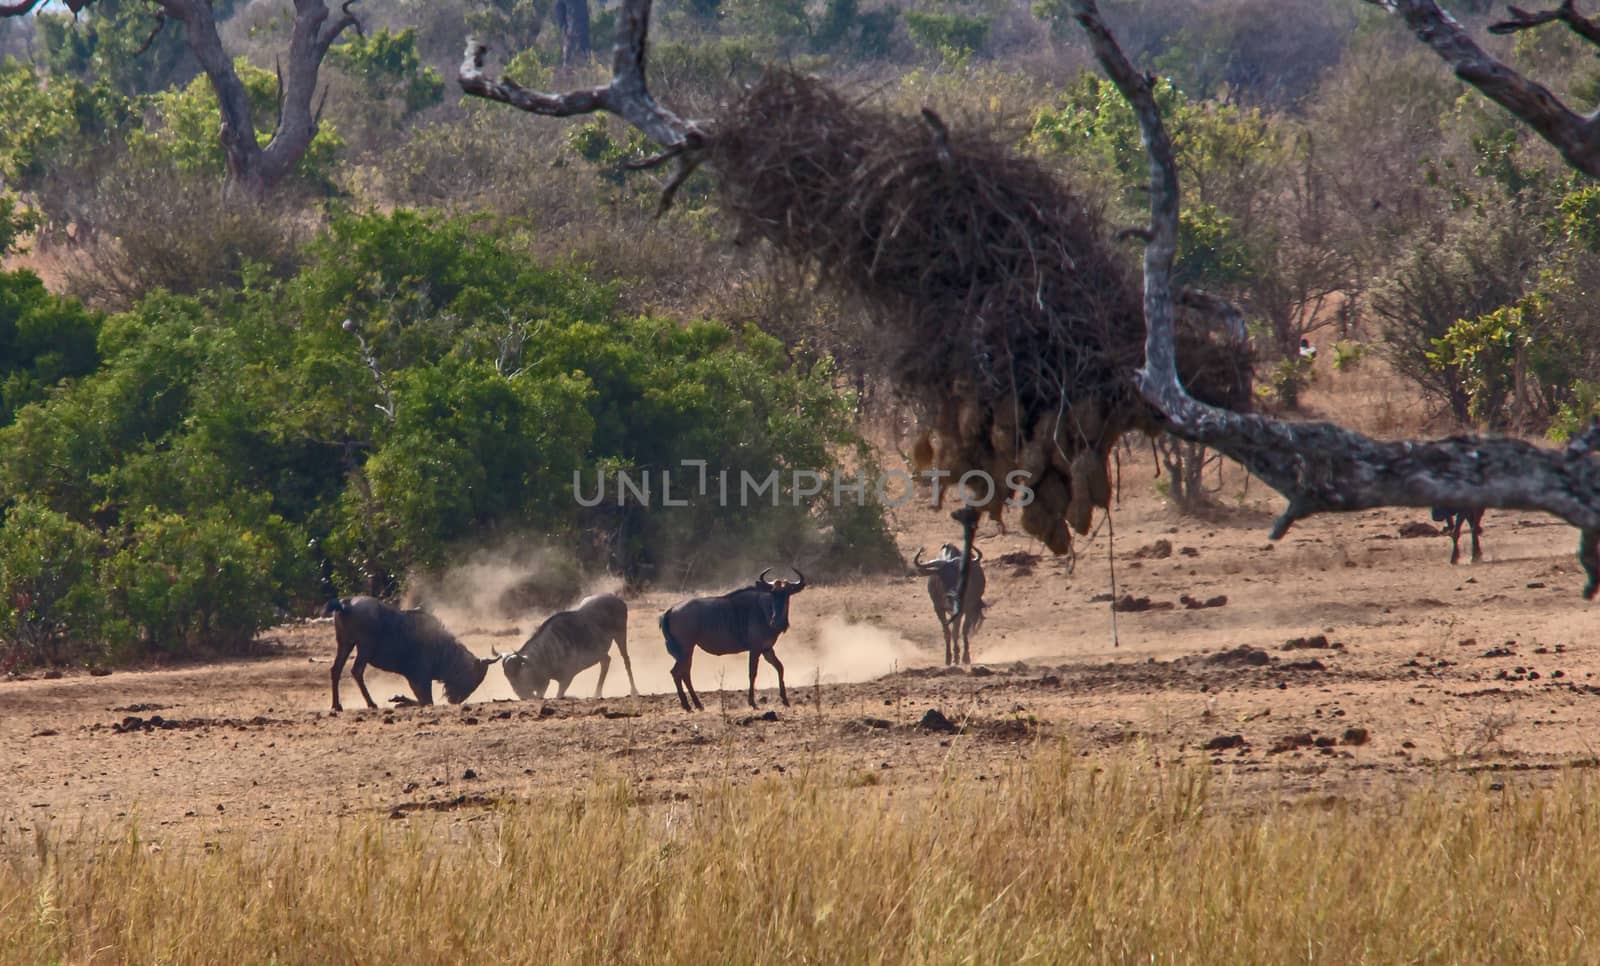 Common or Blue wildebeest (Connochaetes taurinus) photographed fighting for dominance and mating rights in Kruger National Park. South Africa